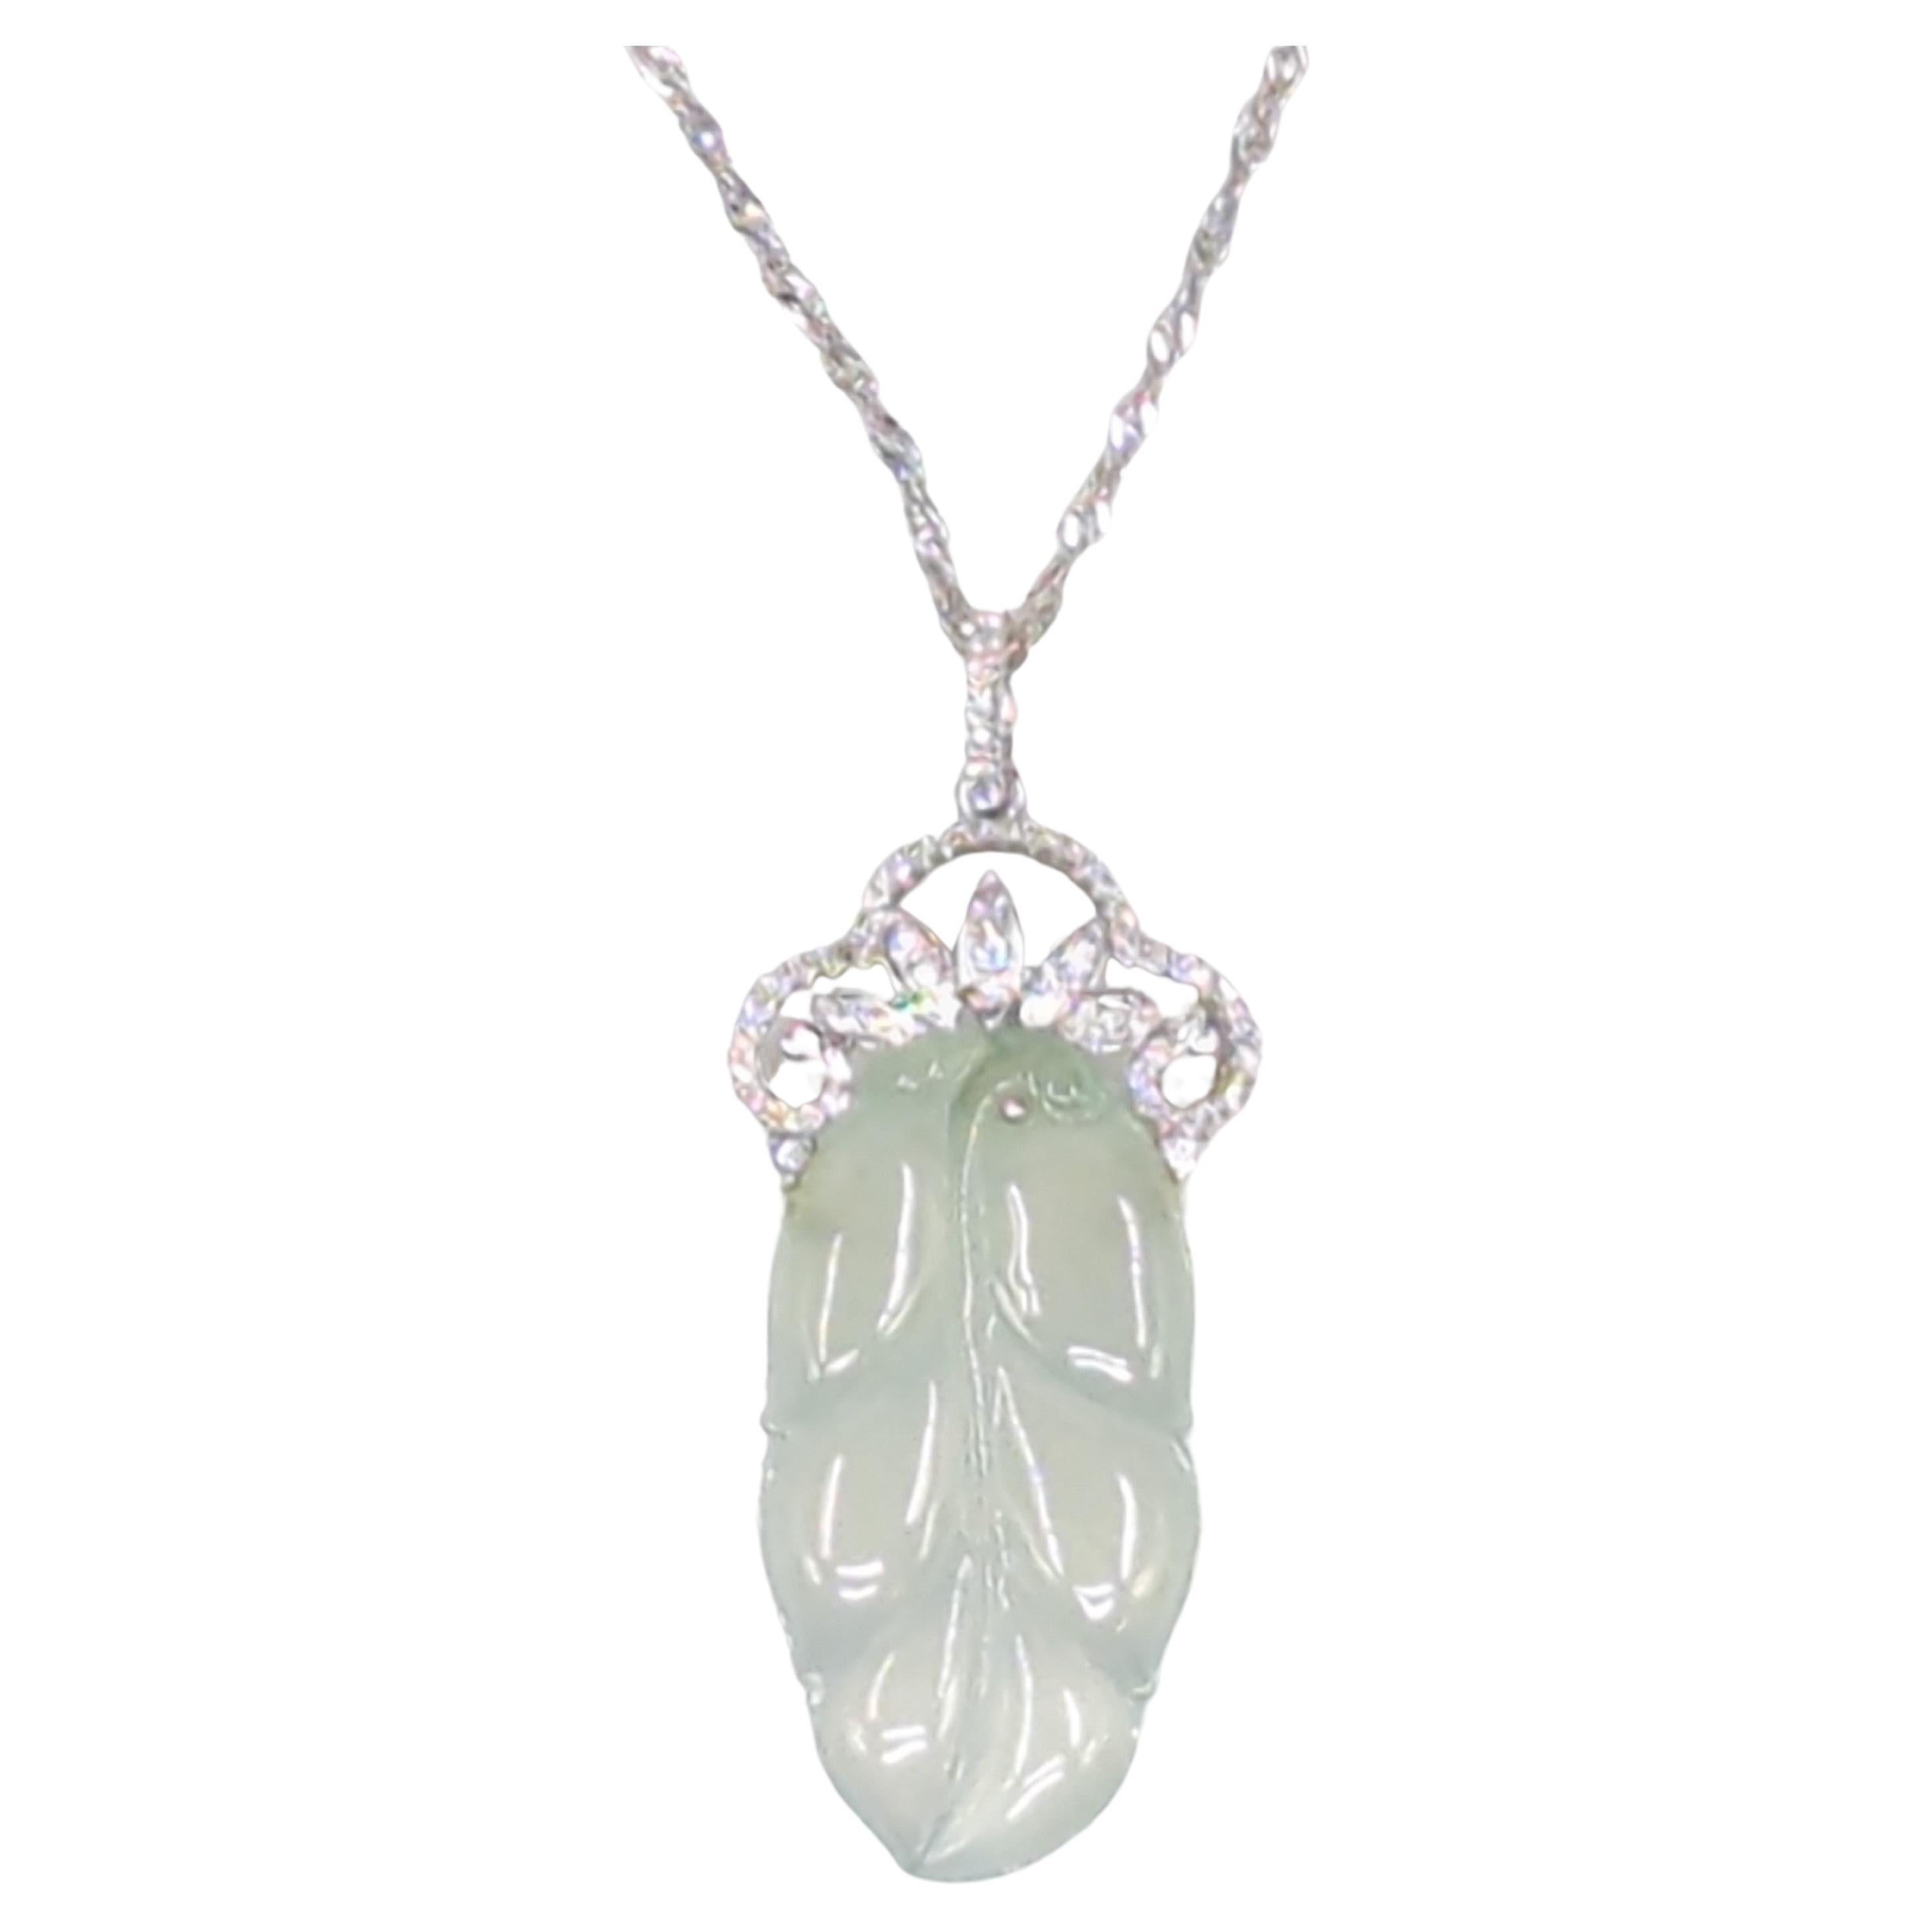 This elegant ladies' pendant featuring 18K white gold is set with a finely carved very pale green icy jadeite leaf pendant (6.22gr). The jadeite exhibits a semi-transparent quality and is finely polished, and set with 55 round brilliant cut diamonds